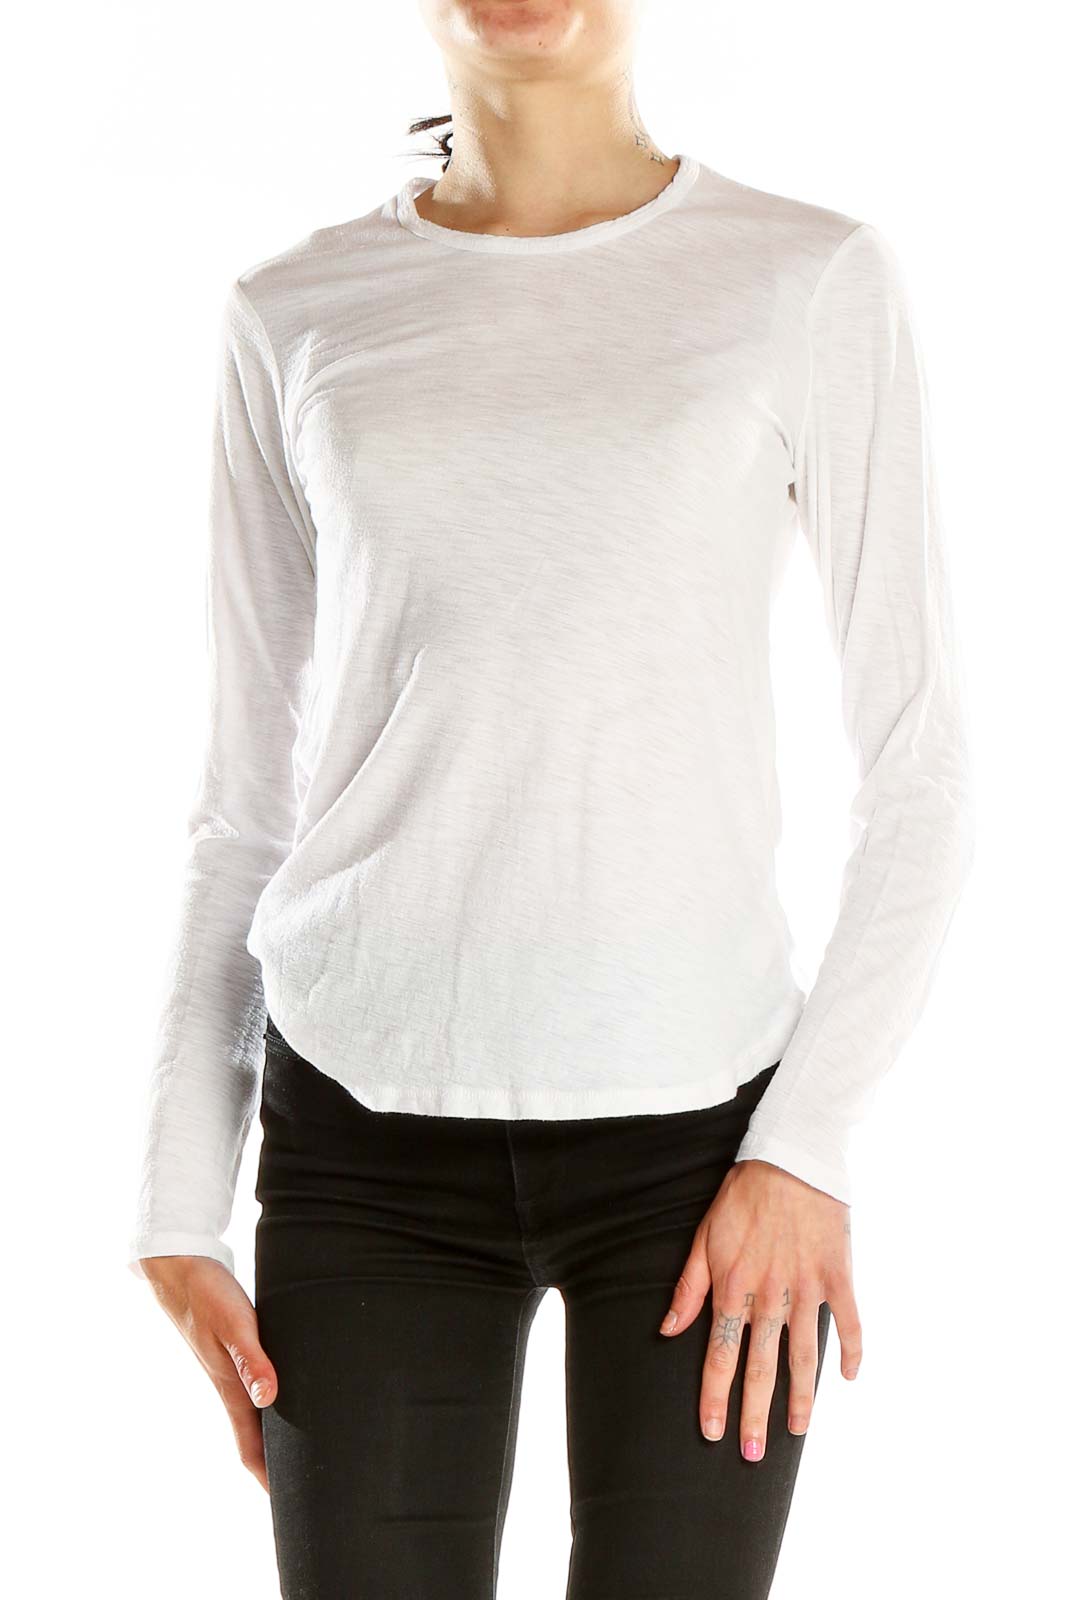 White Casual Shirt Front